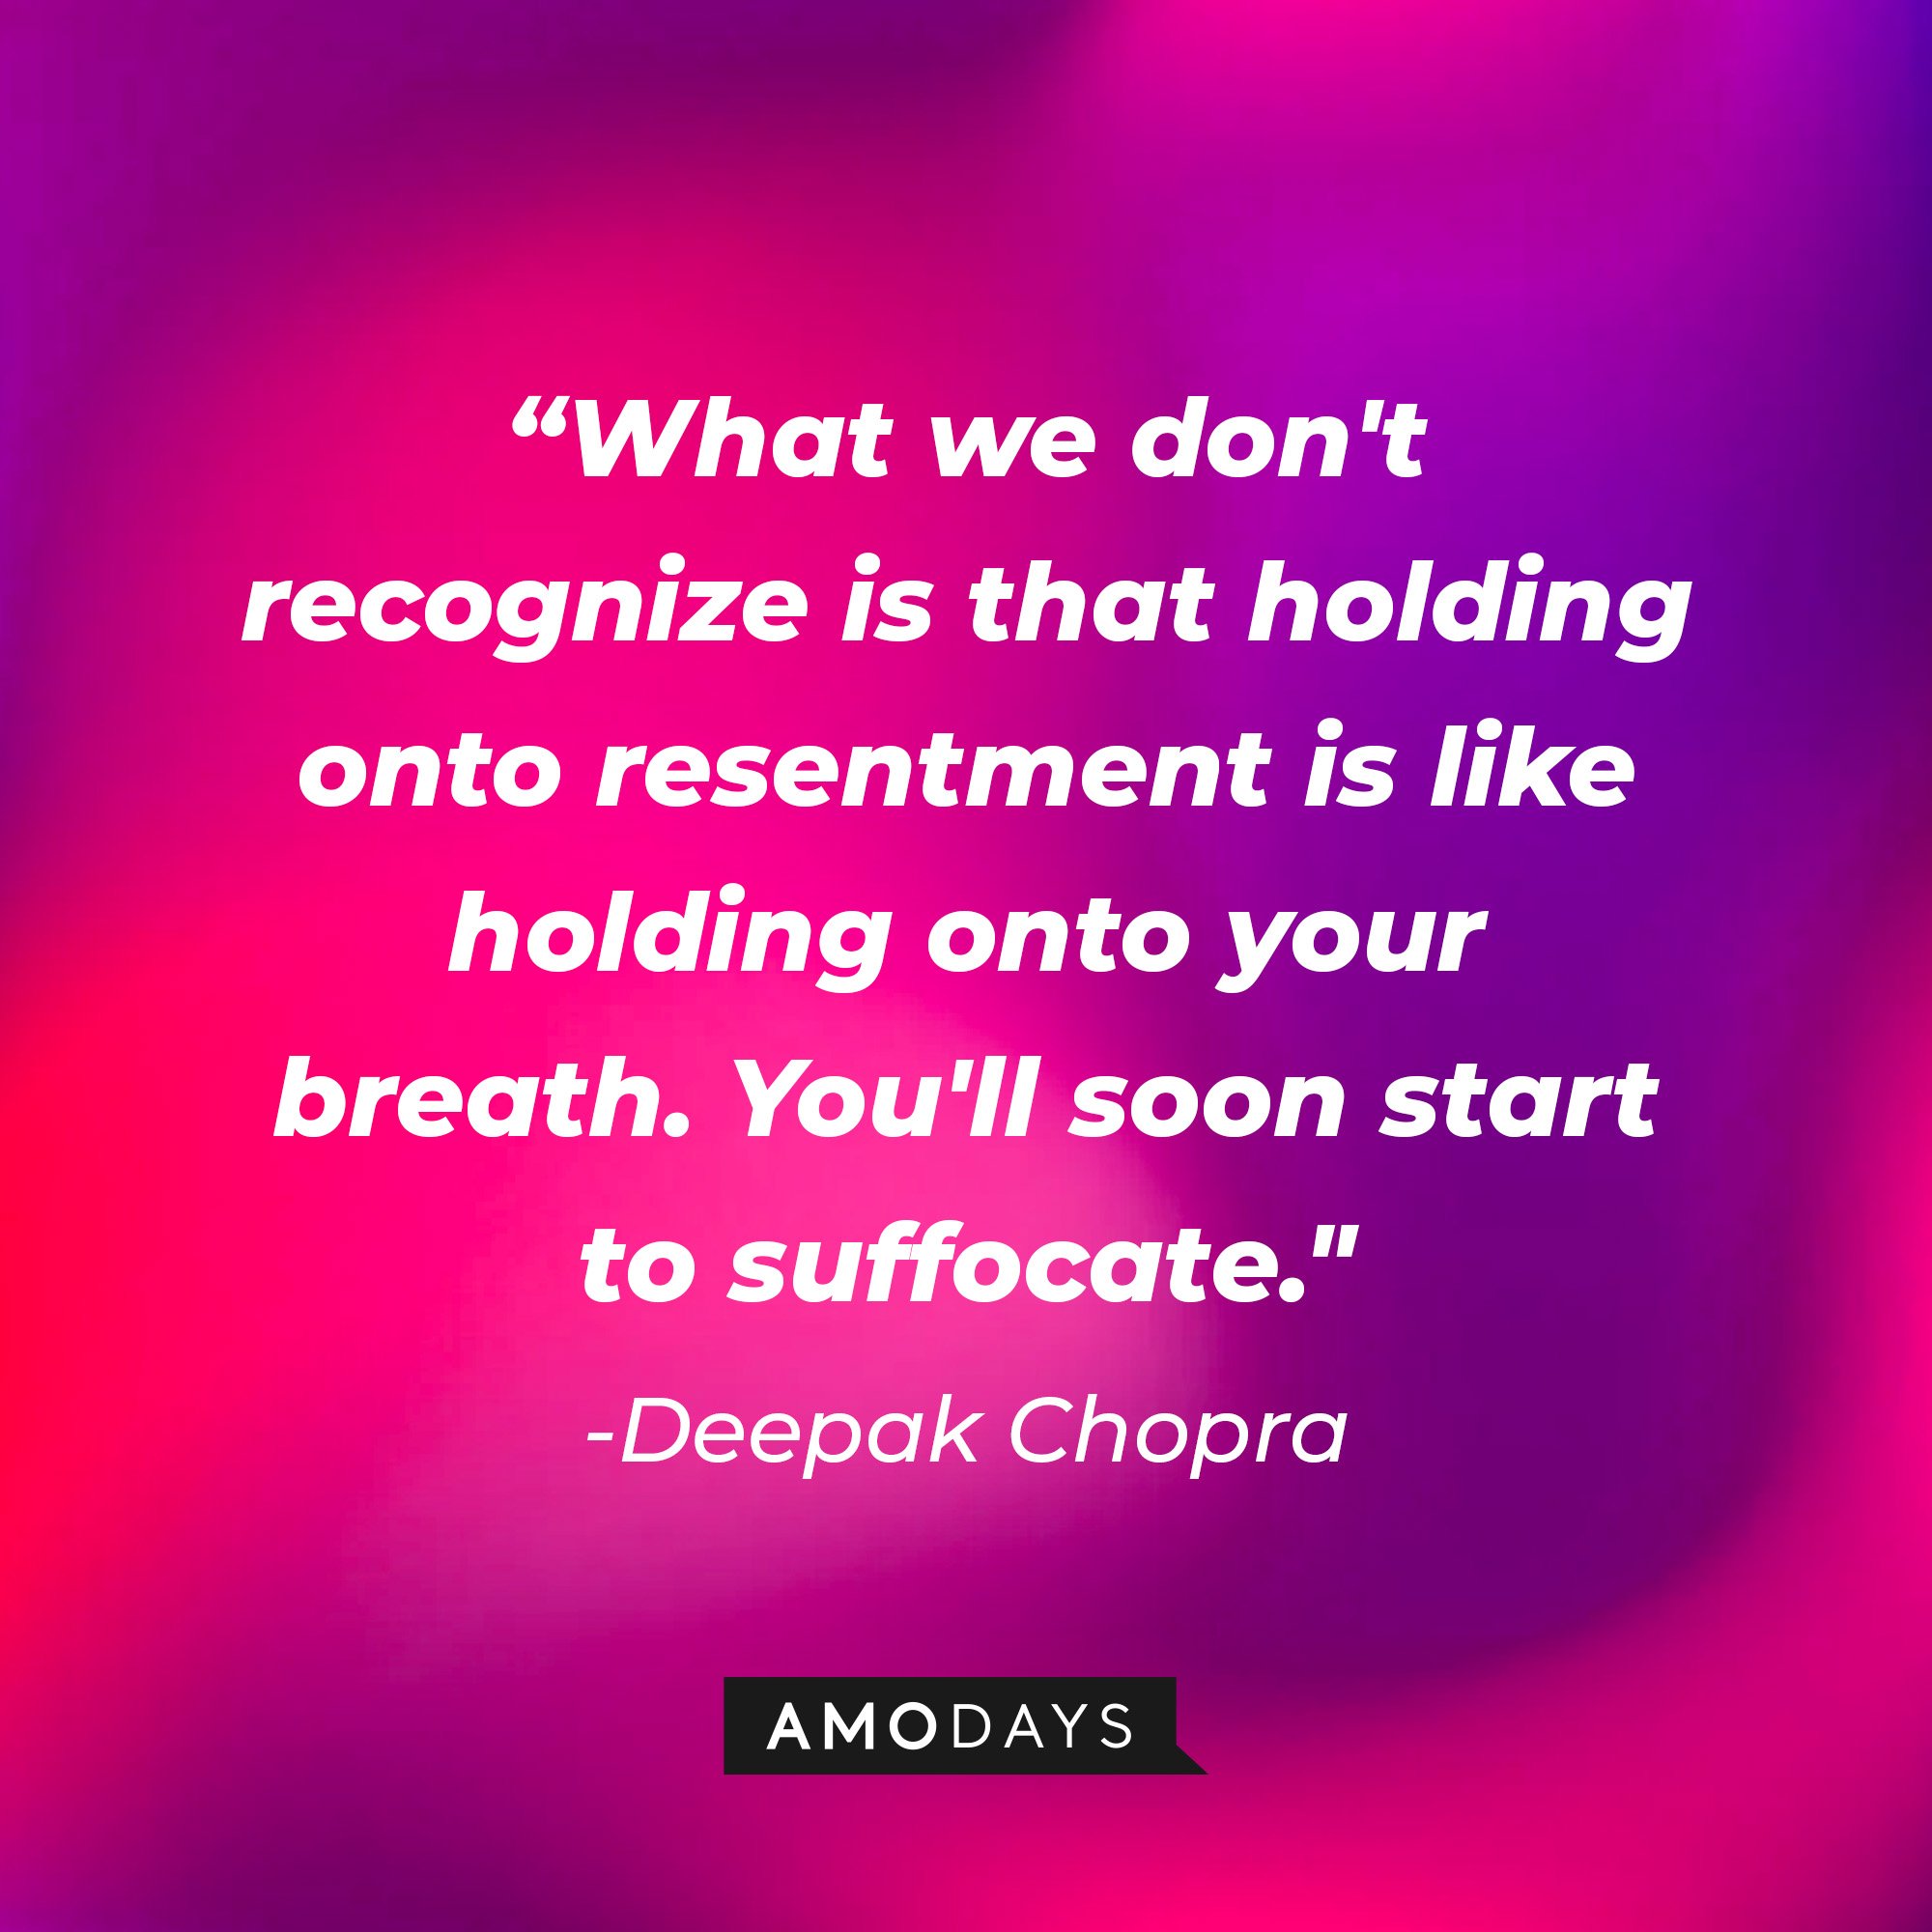 Deepak Chopra’s quote: "What we don't recognize is that holding onto resentment is like holding onto your breath. You'll soon start to suffocate." | Image: AmoDays